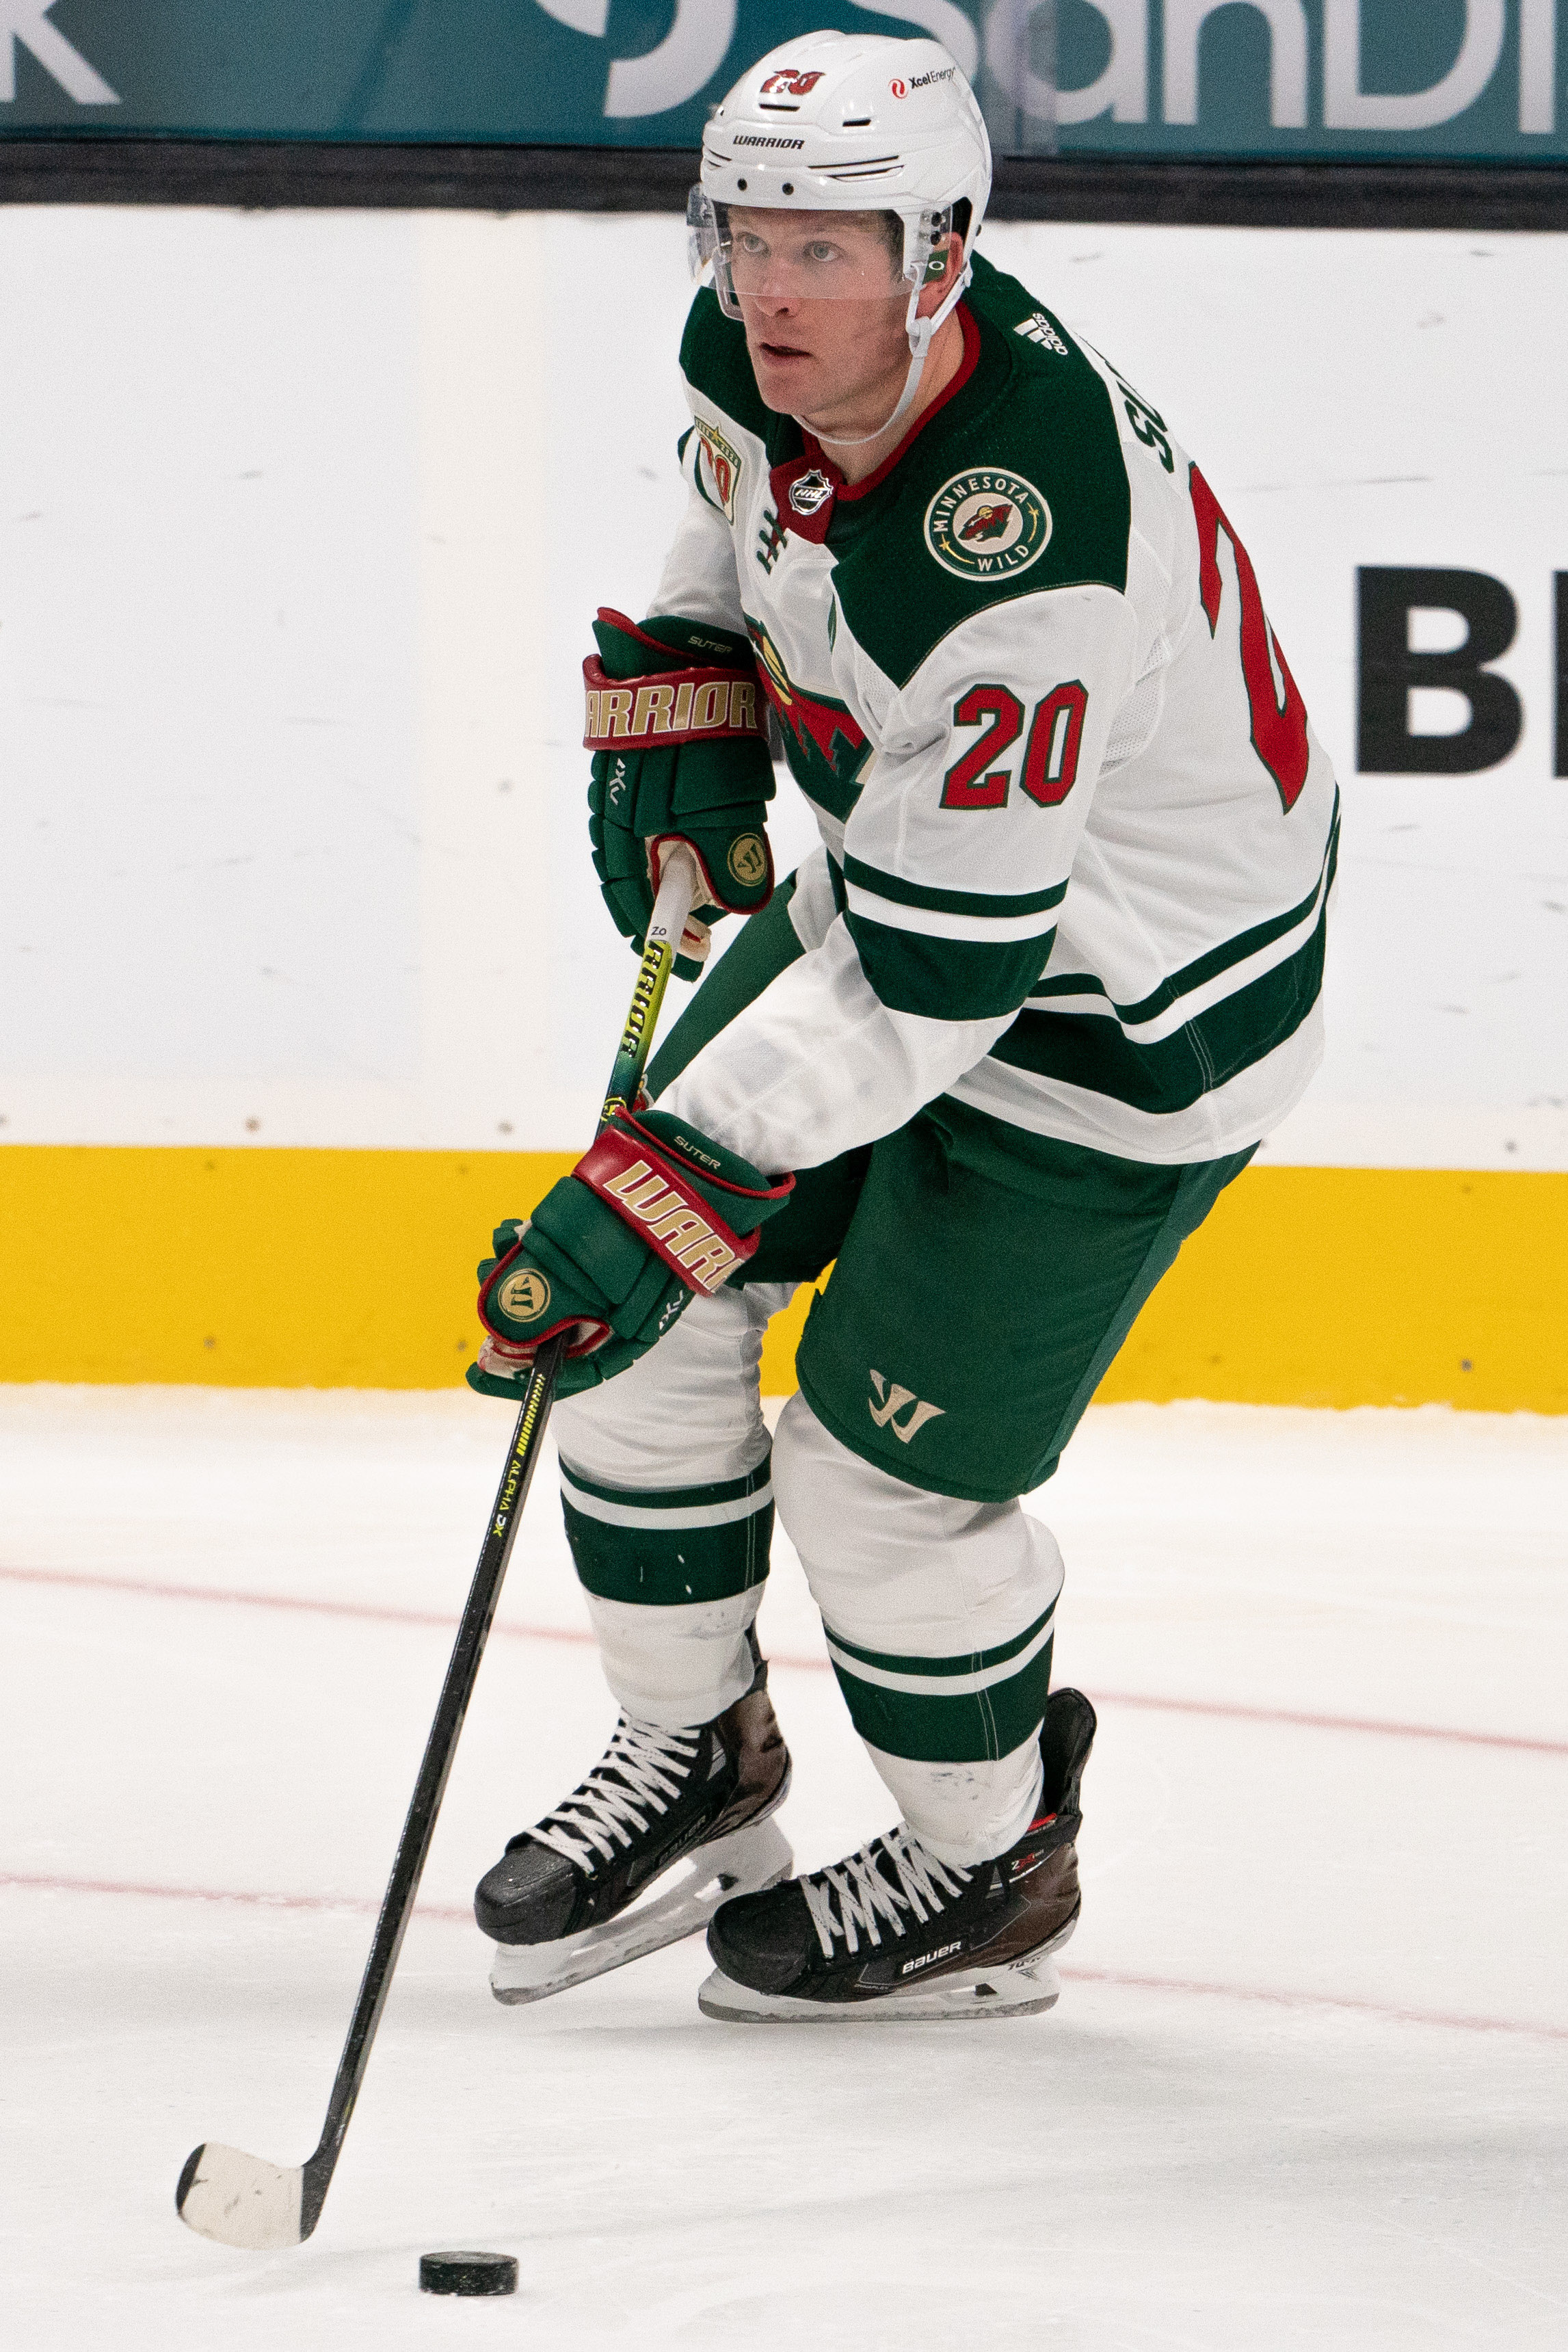 Zach Parise, cut by the Wild, lands with the New York Islanders